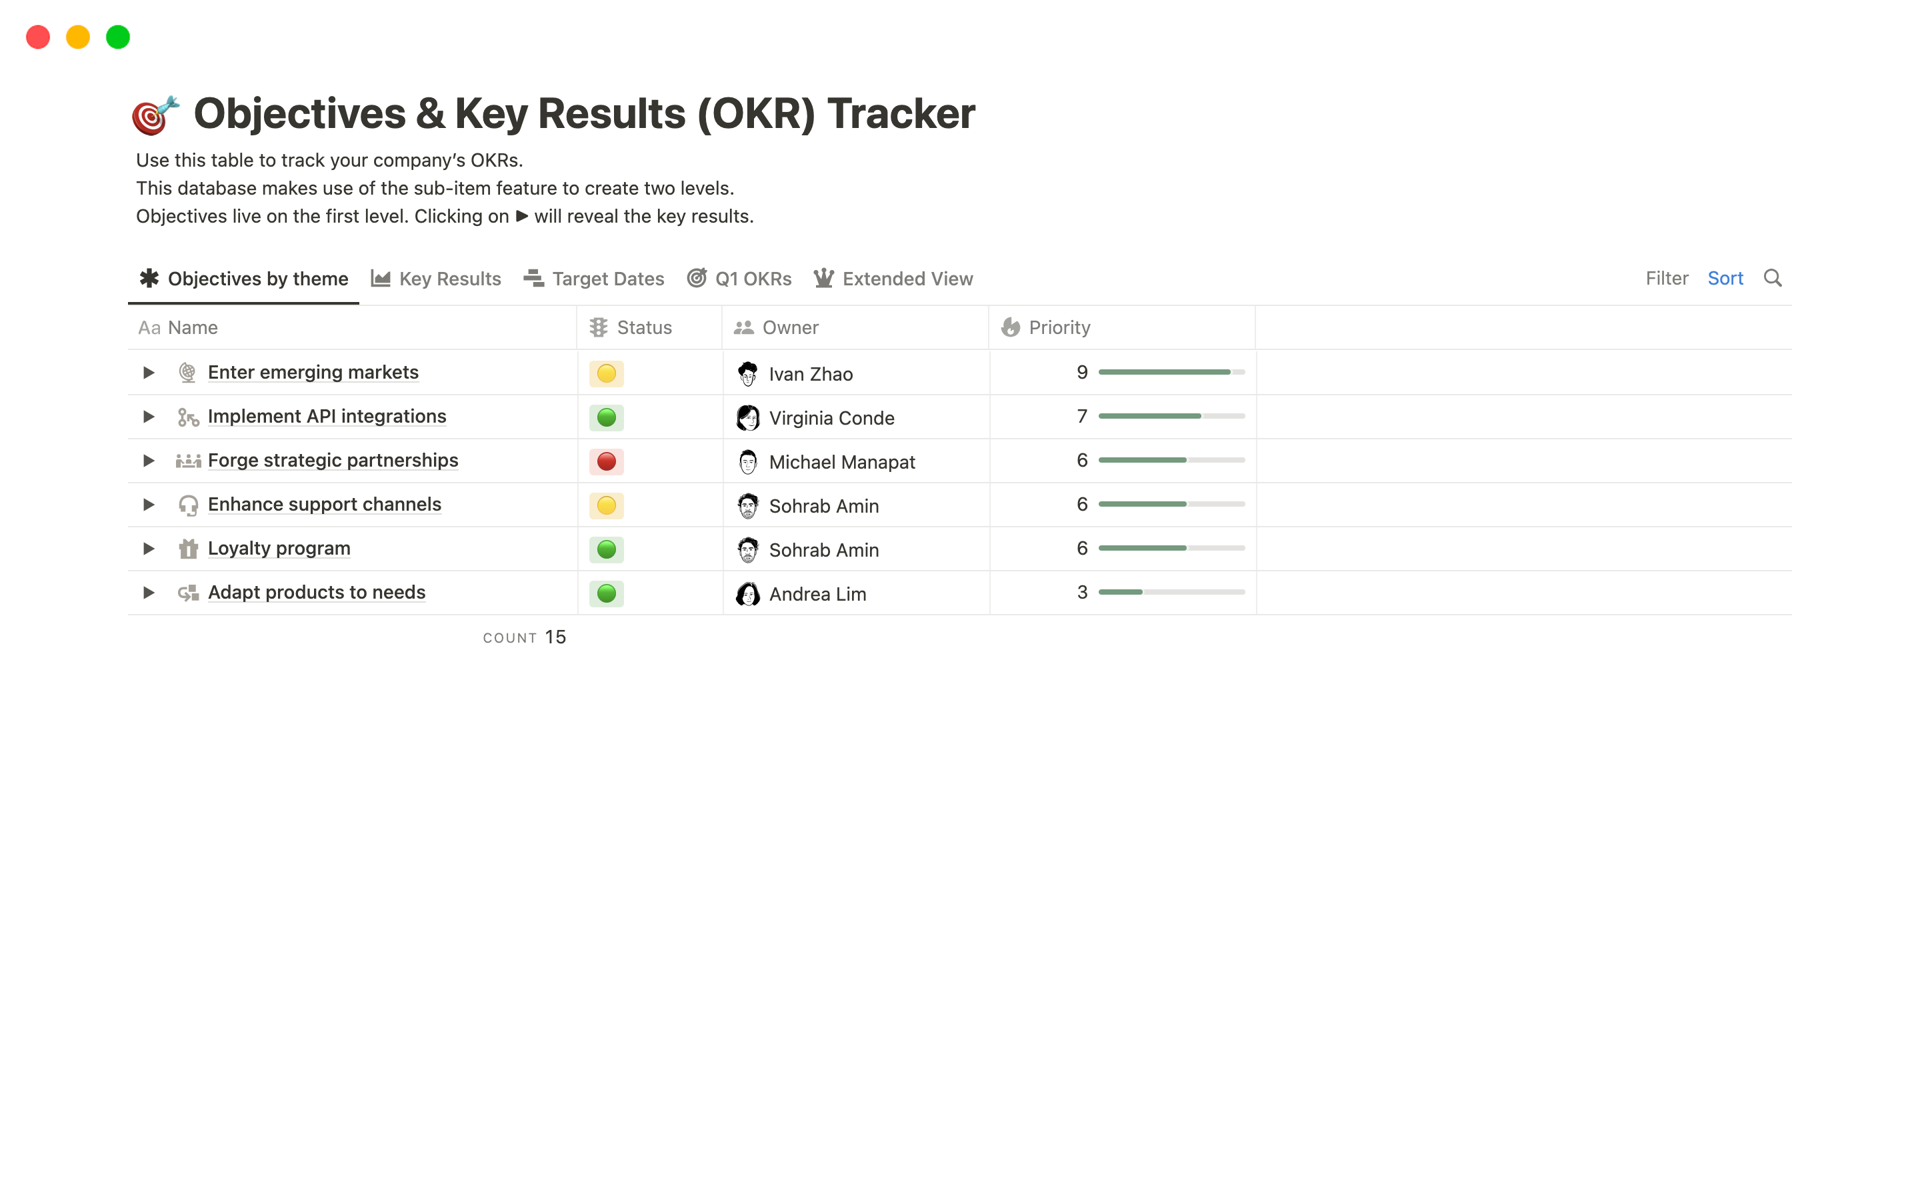 Keep track of your OKRs with status, owner, priority, and timeline details using our Objectives & Key Results Tracker template.